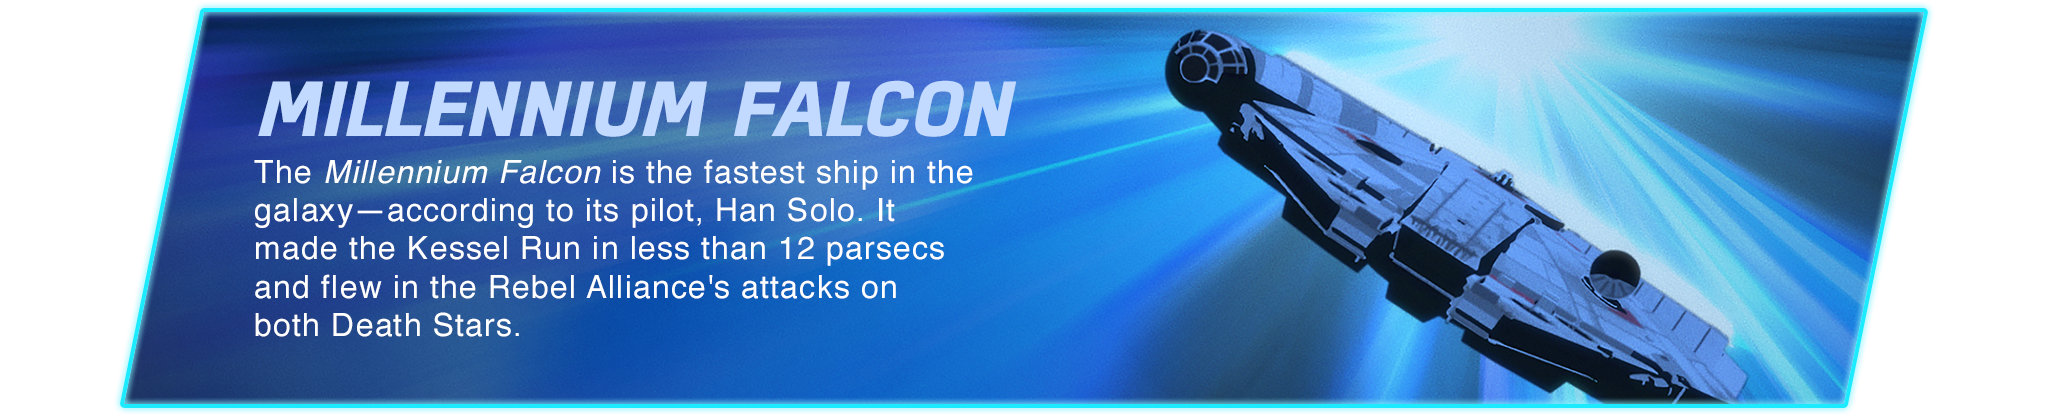 Millennium Falcon - The Millennium Falcon is the fastest ship in the galaxy—according to its pilot, Han Solo. It made the Kessel Run in less than 12 parsecs and flew in the Rebel Alliance's attacks on both Death Stars.